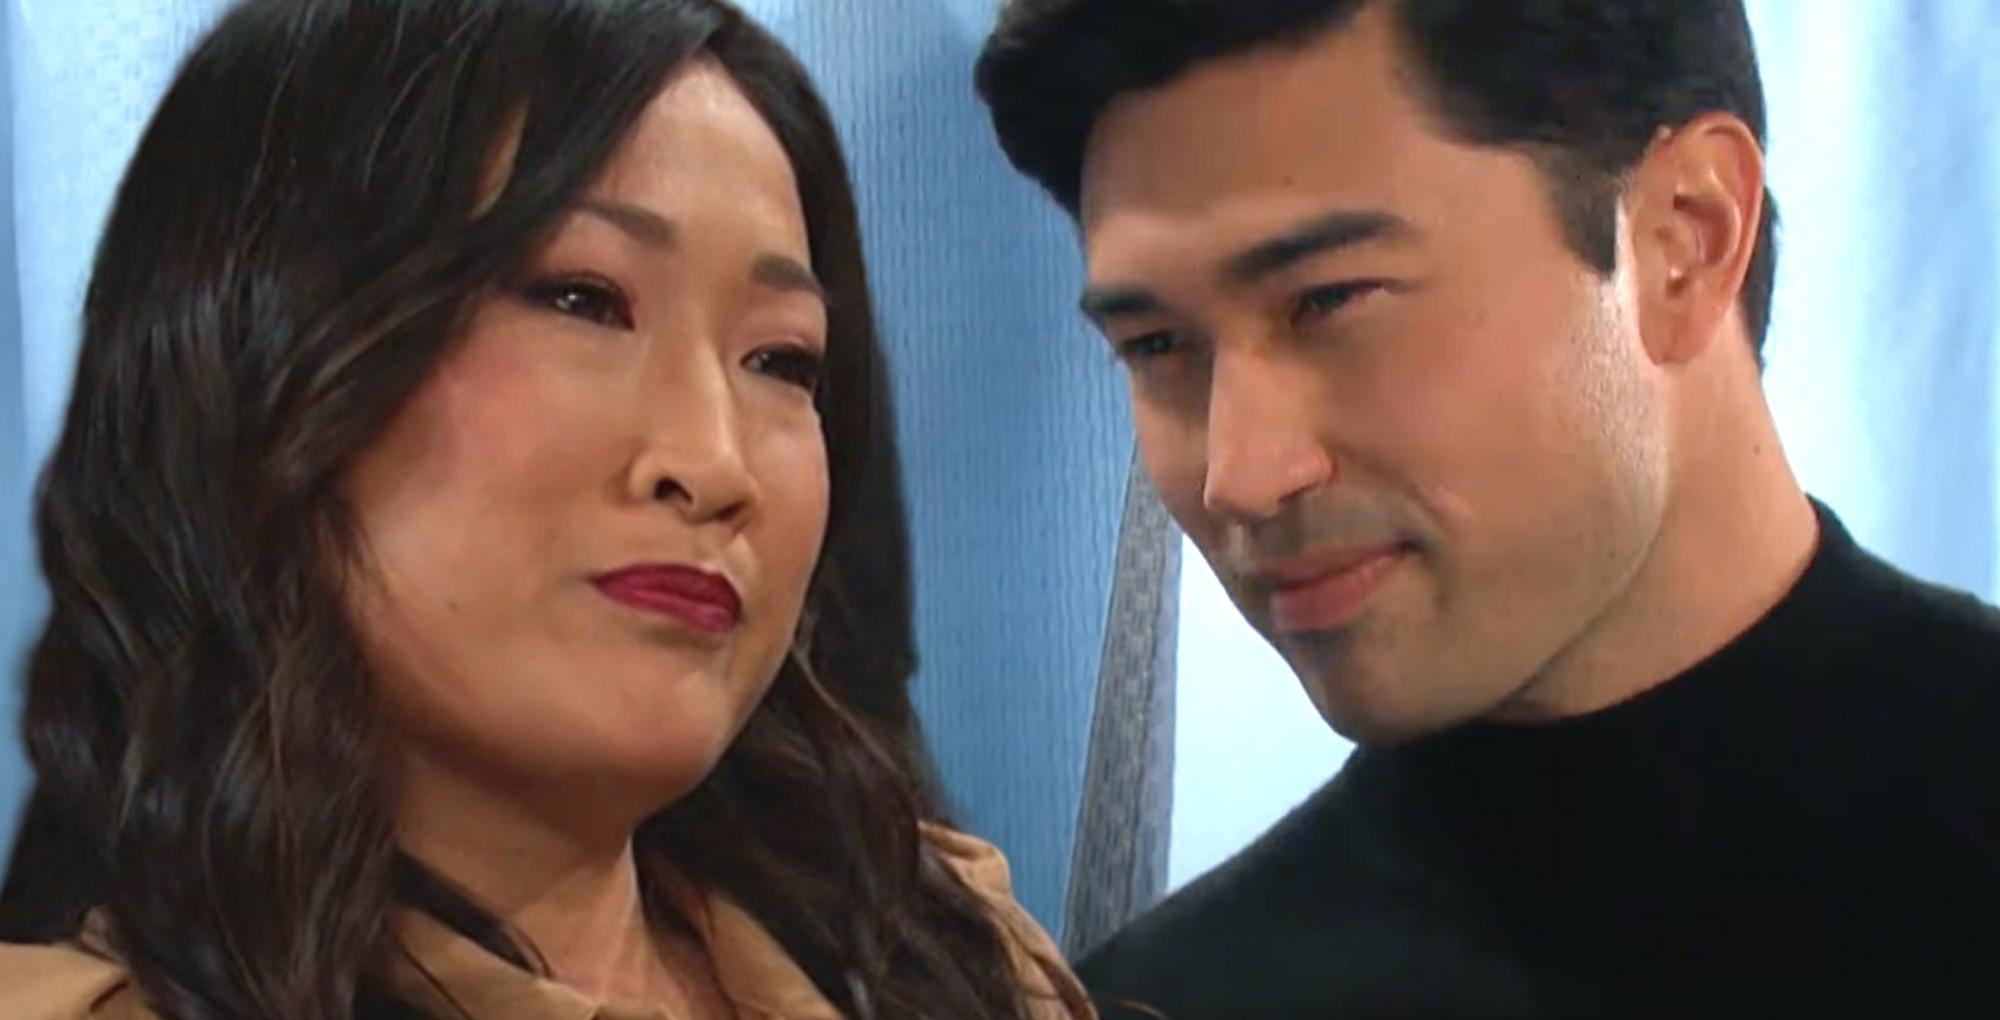 melinda trask has a date with li shin on days of our lives.